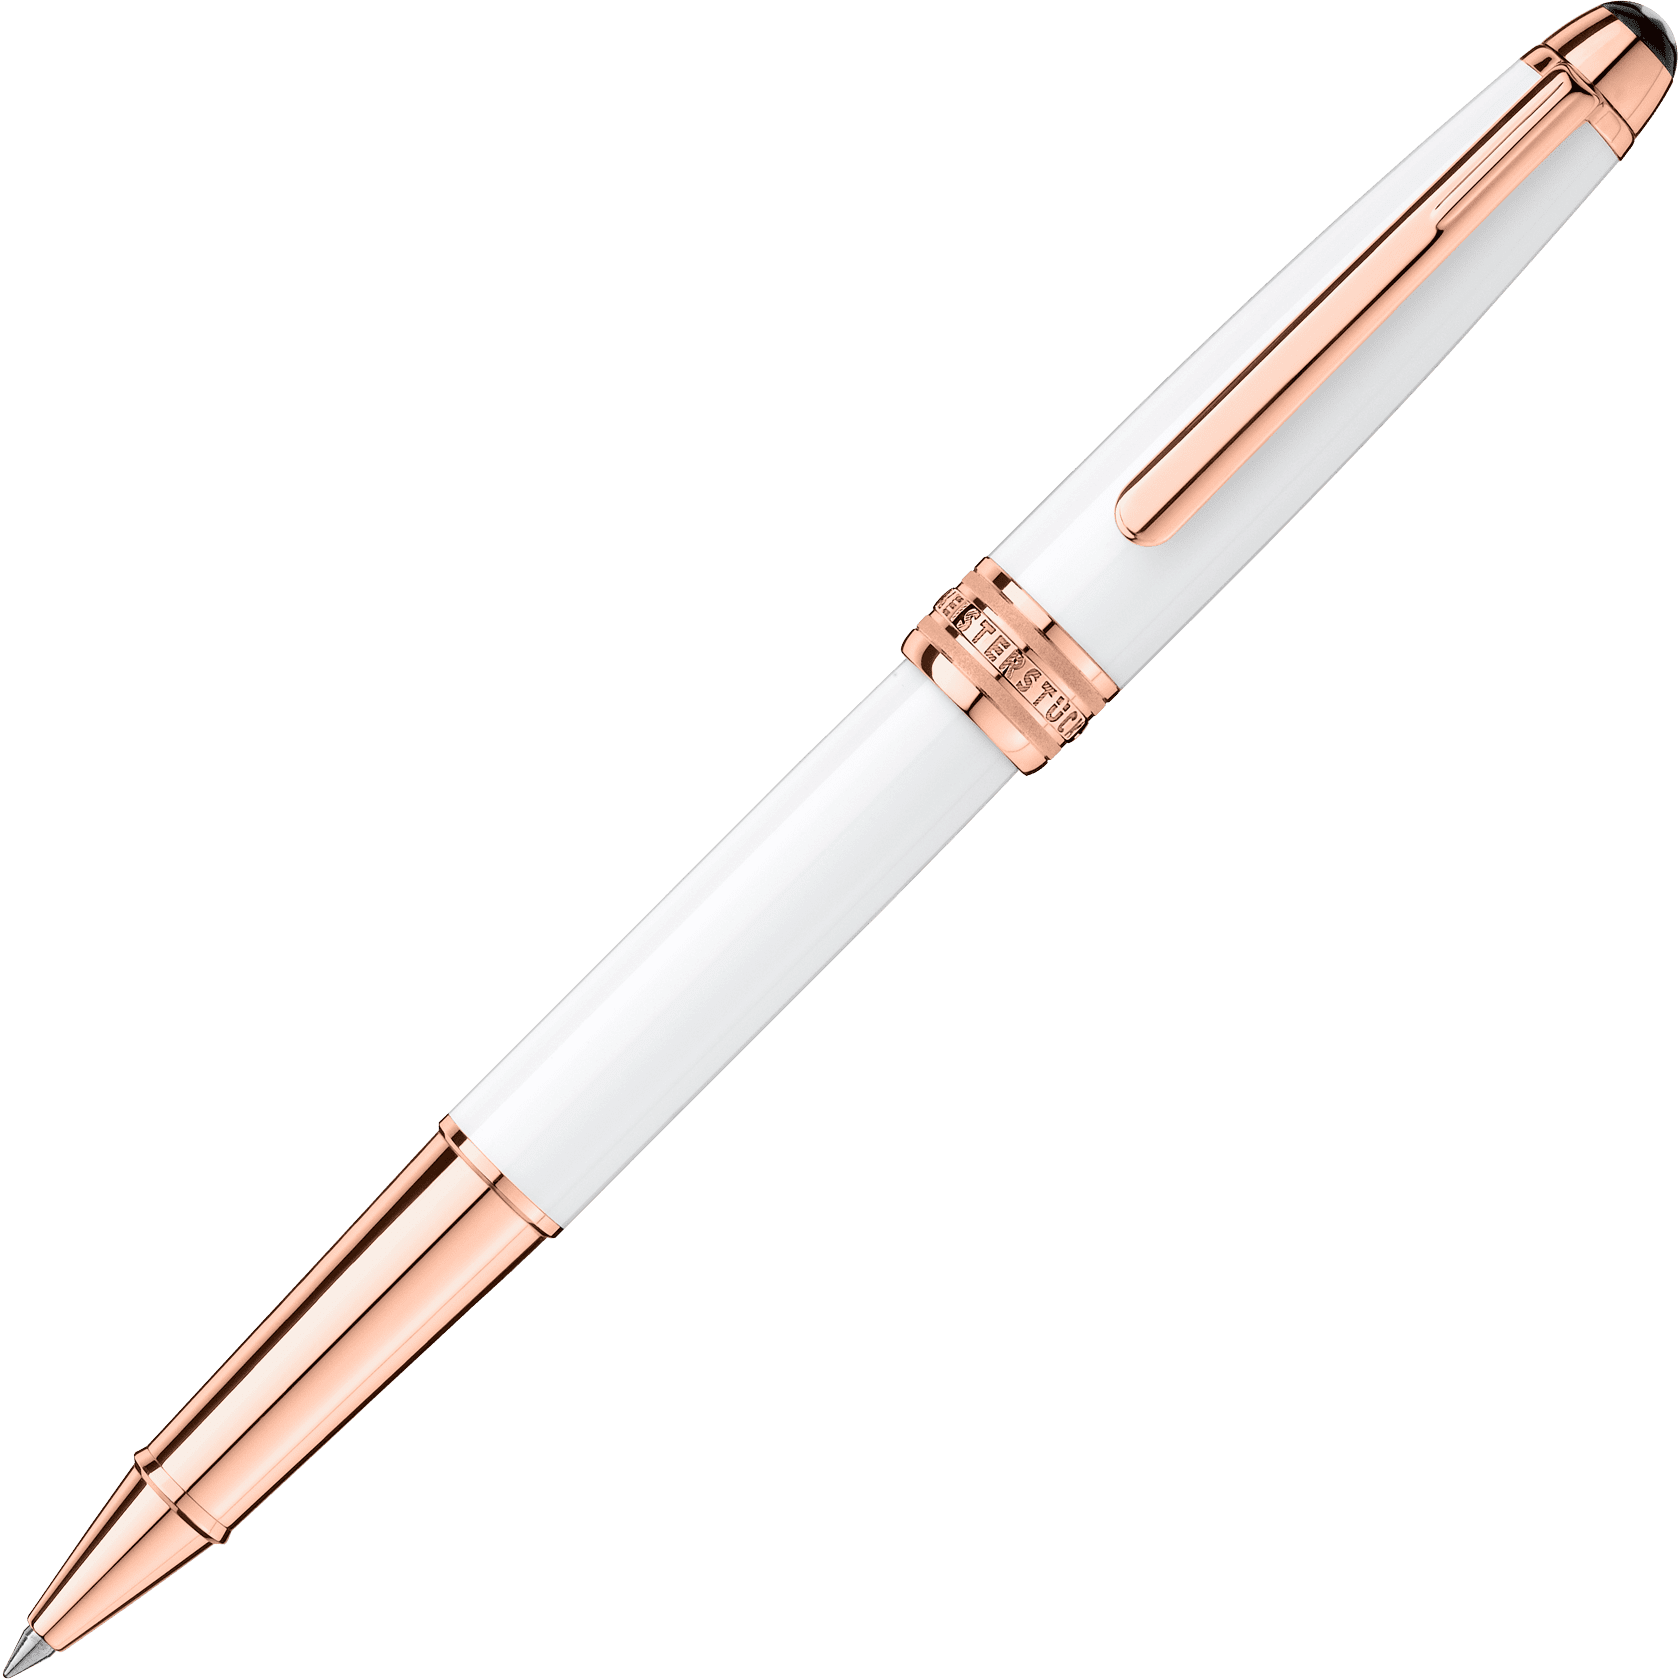 Meisterst&uuml;ck White Solitaire Rose Gold Classique Rollerball